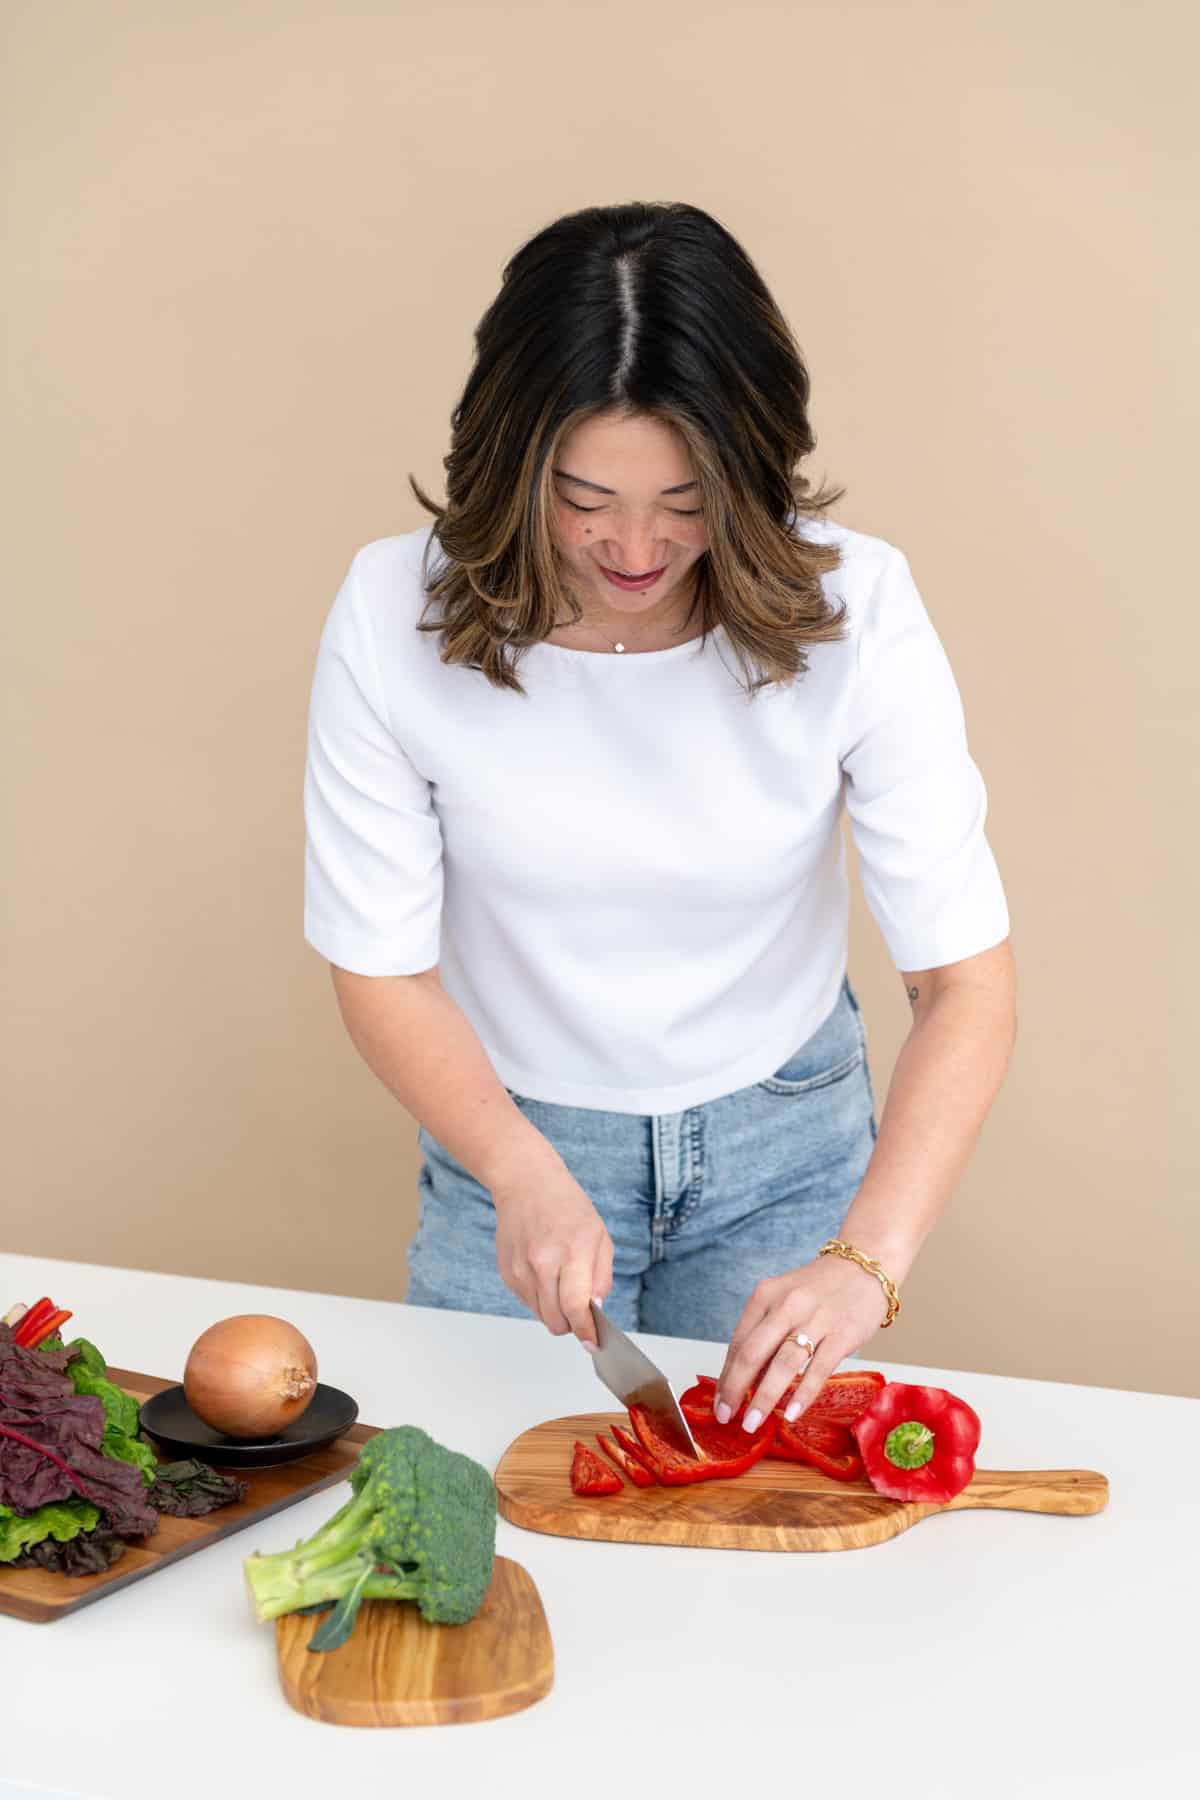 Julie Chiou with white shirt and light blue jeans slicing a red bell pepper on a wooden cutting board